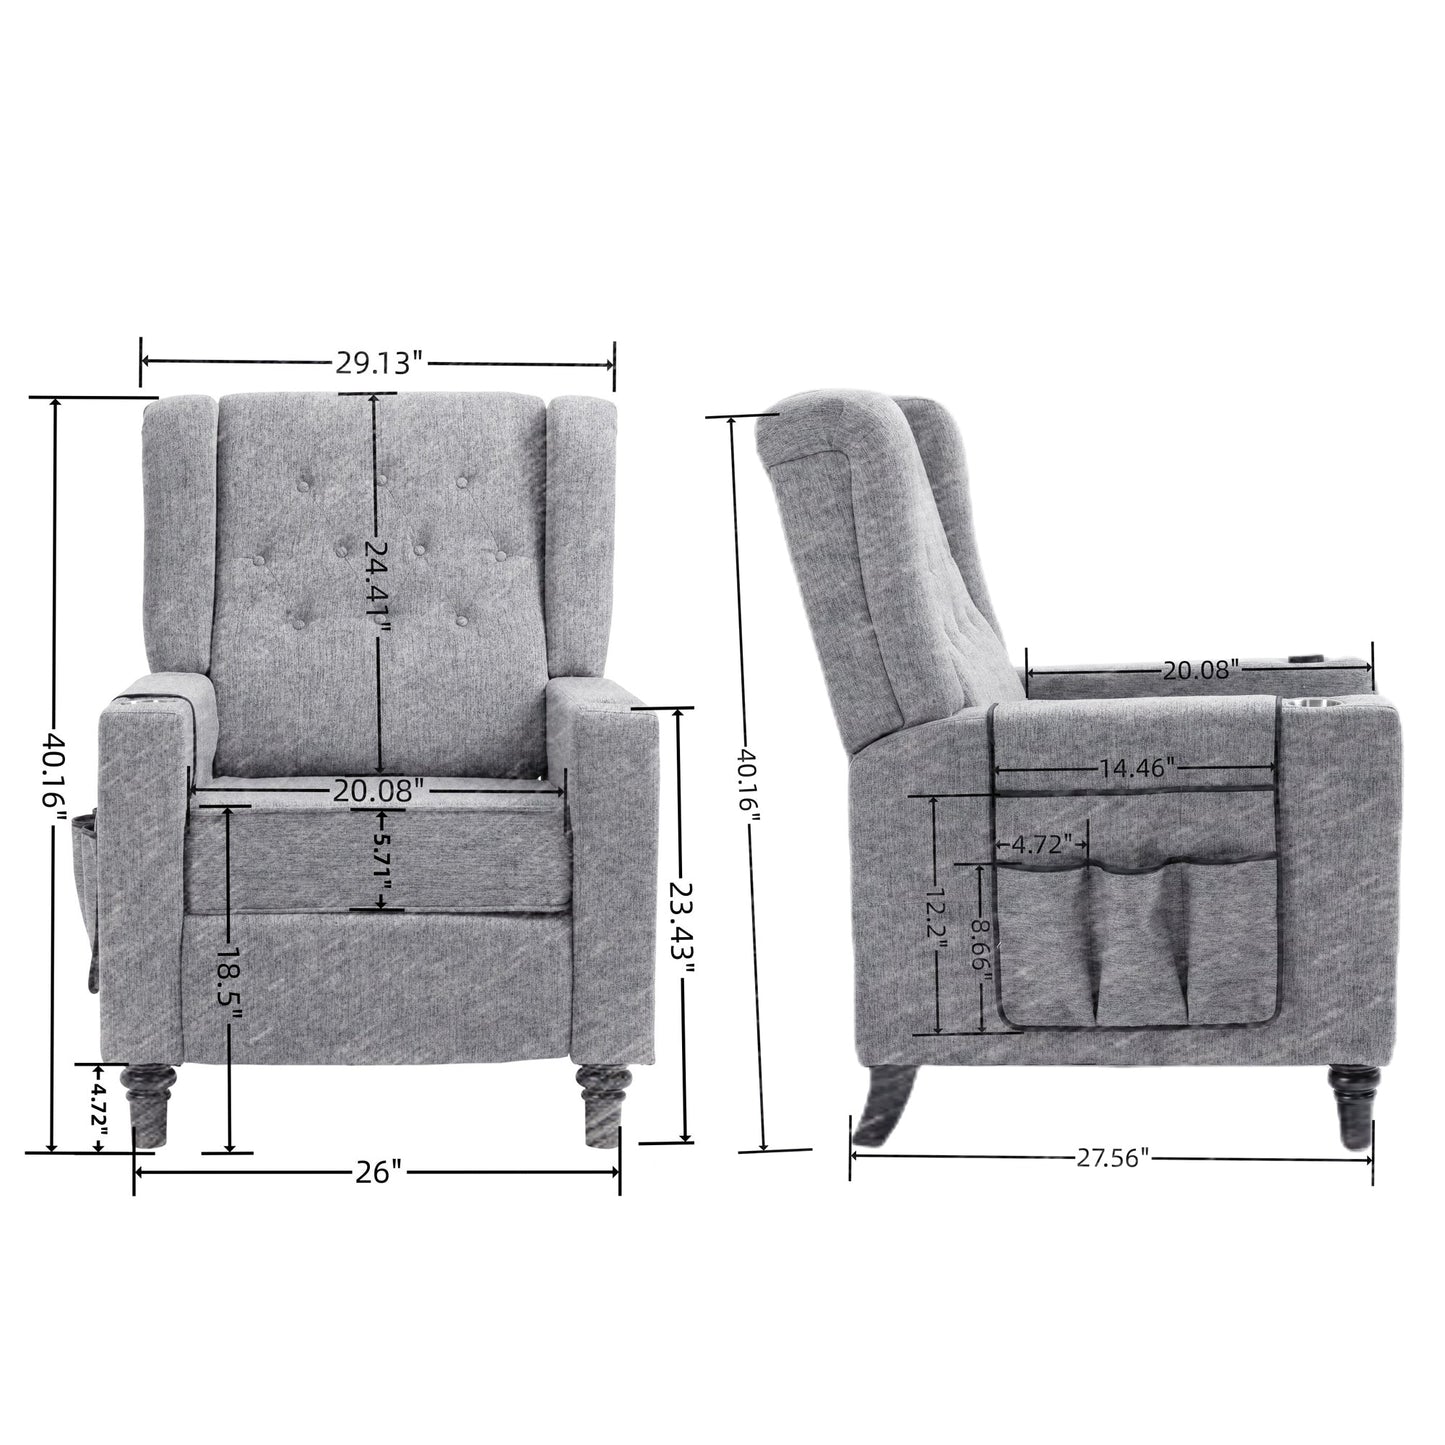 Arm Pushing Recliner Chair, Modern Button Tufted Wingback Push Back Recliner Chair, Living Room Chair Fabric Pushback Manual Single Reclining Sofa Home Theater Seating for Bedroom,Navy Blue